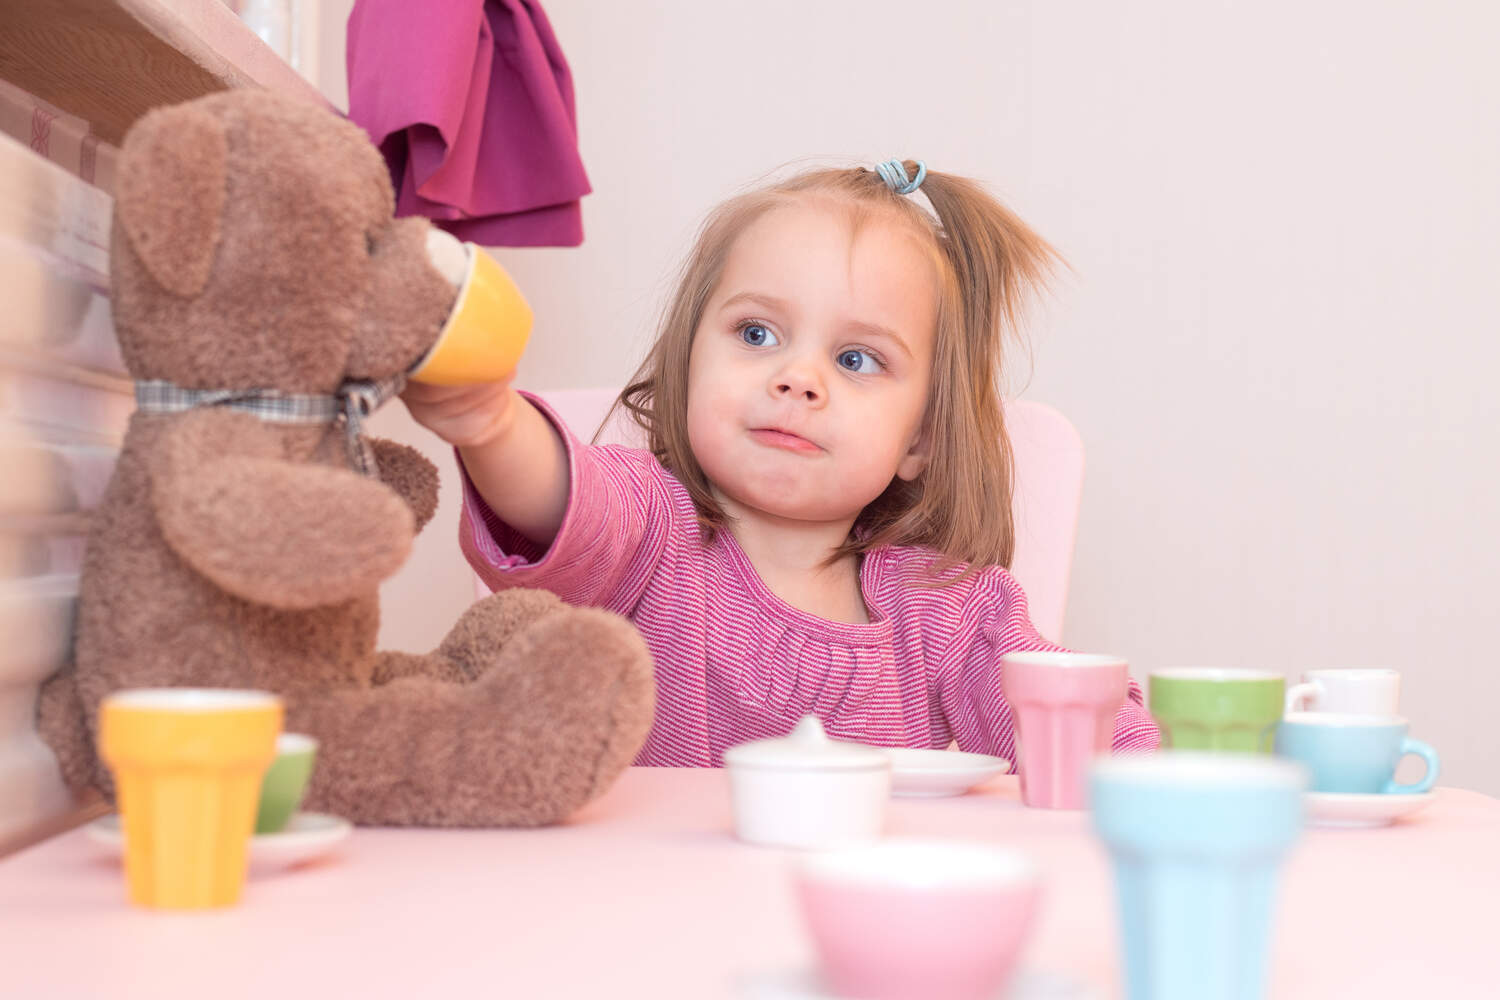 Your toddler may have imaginary friends